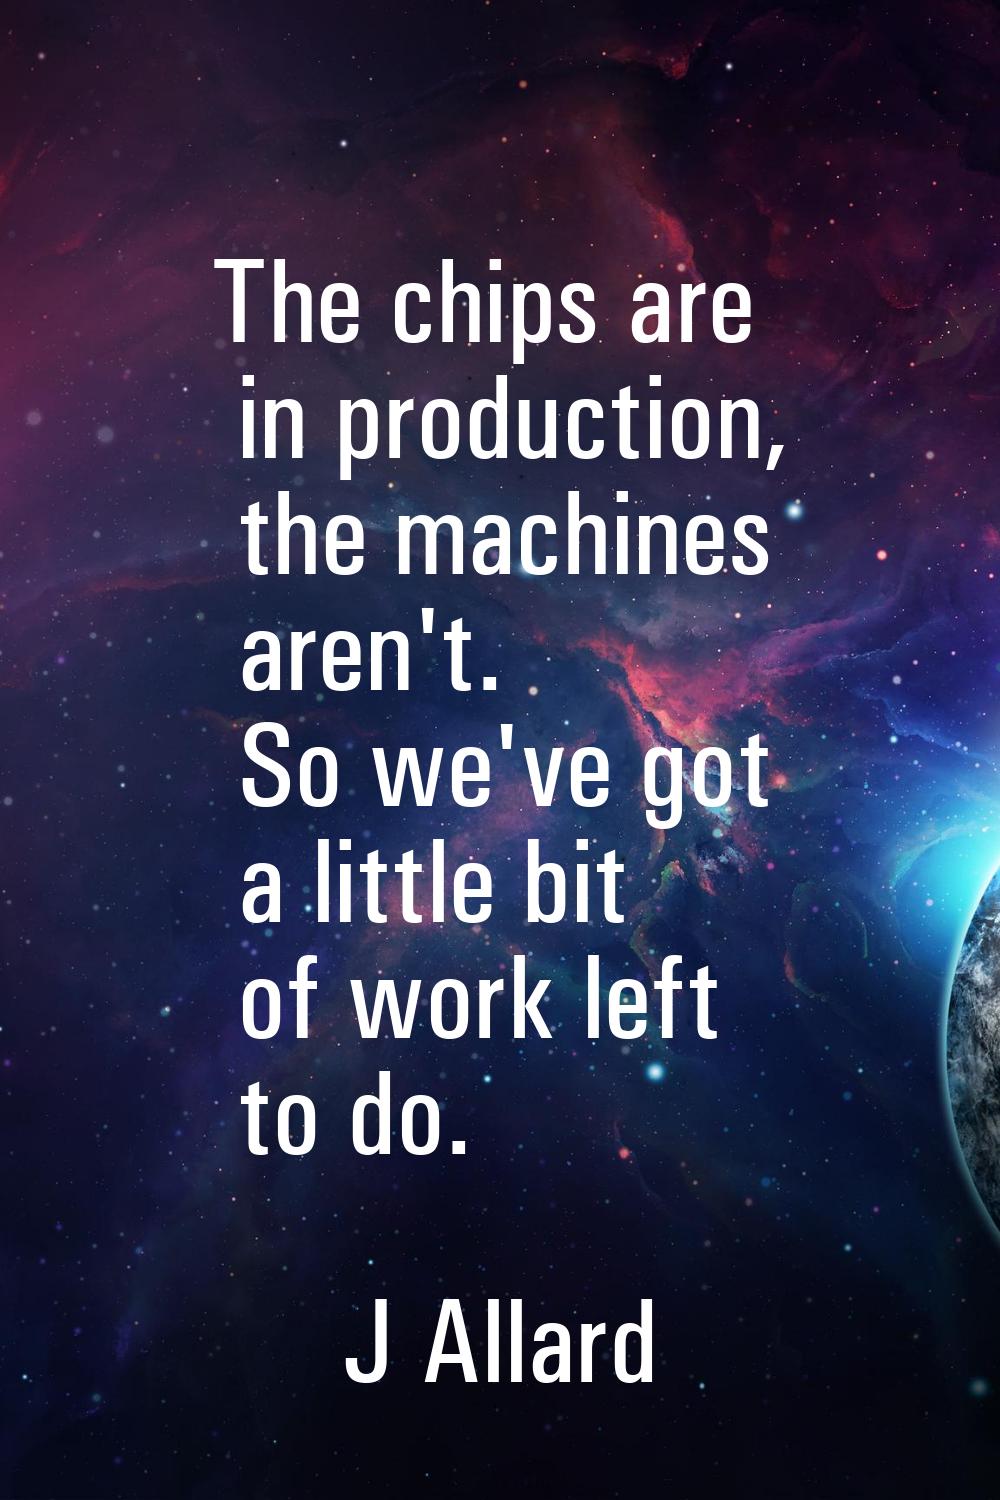 The chips are in production, the machines aren't. So we've got a little bit of work left to do.